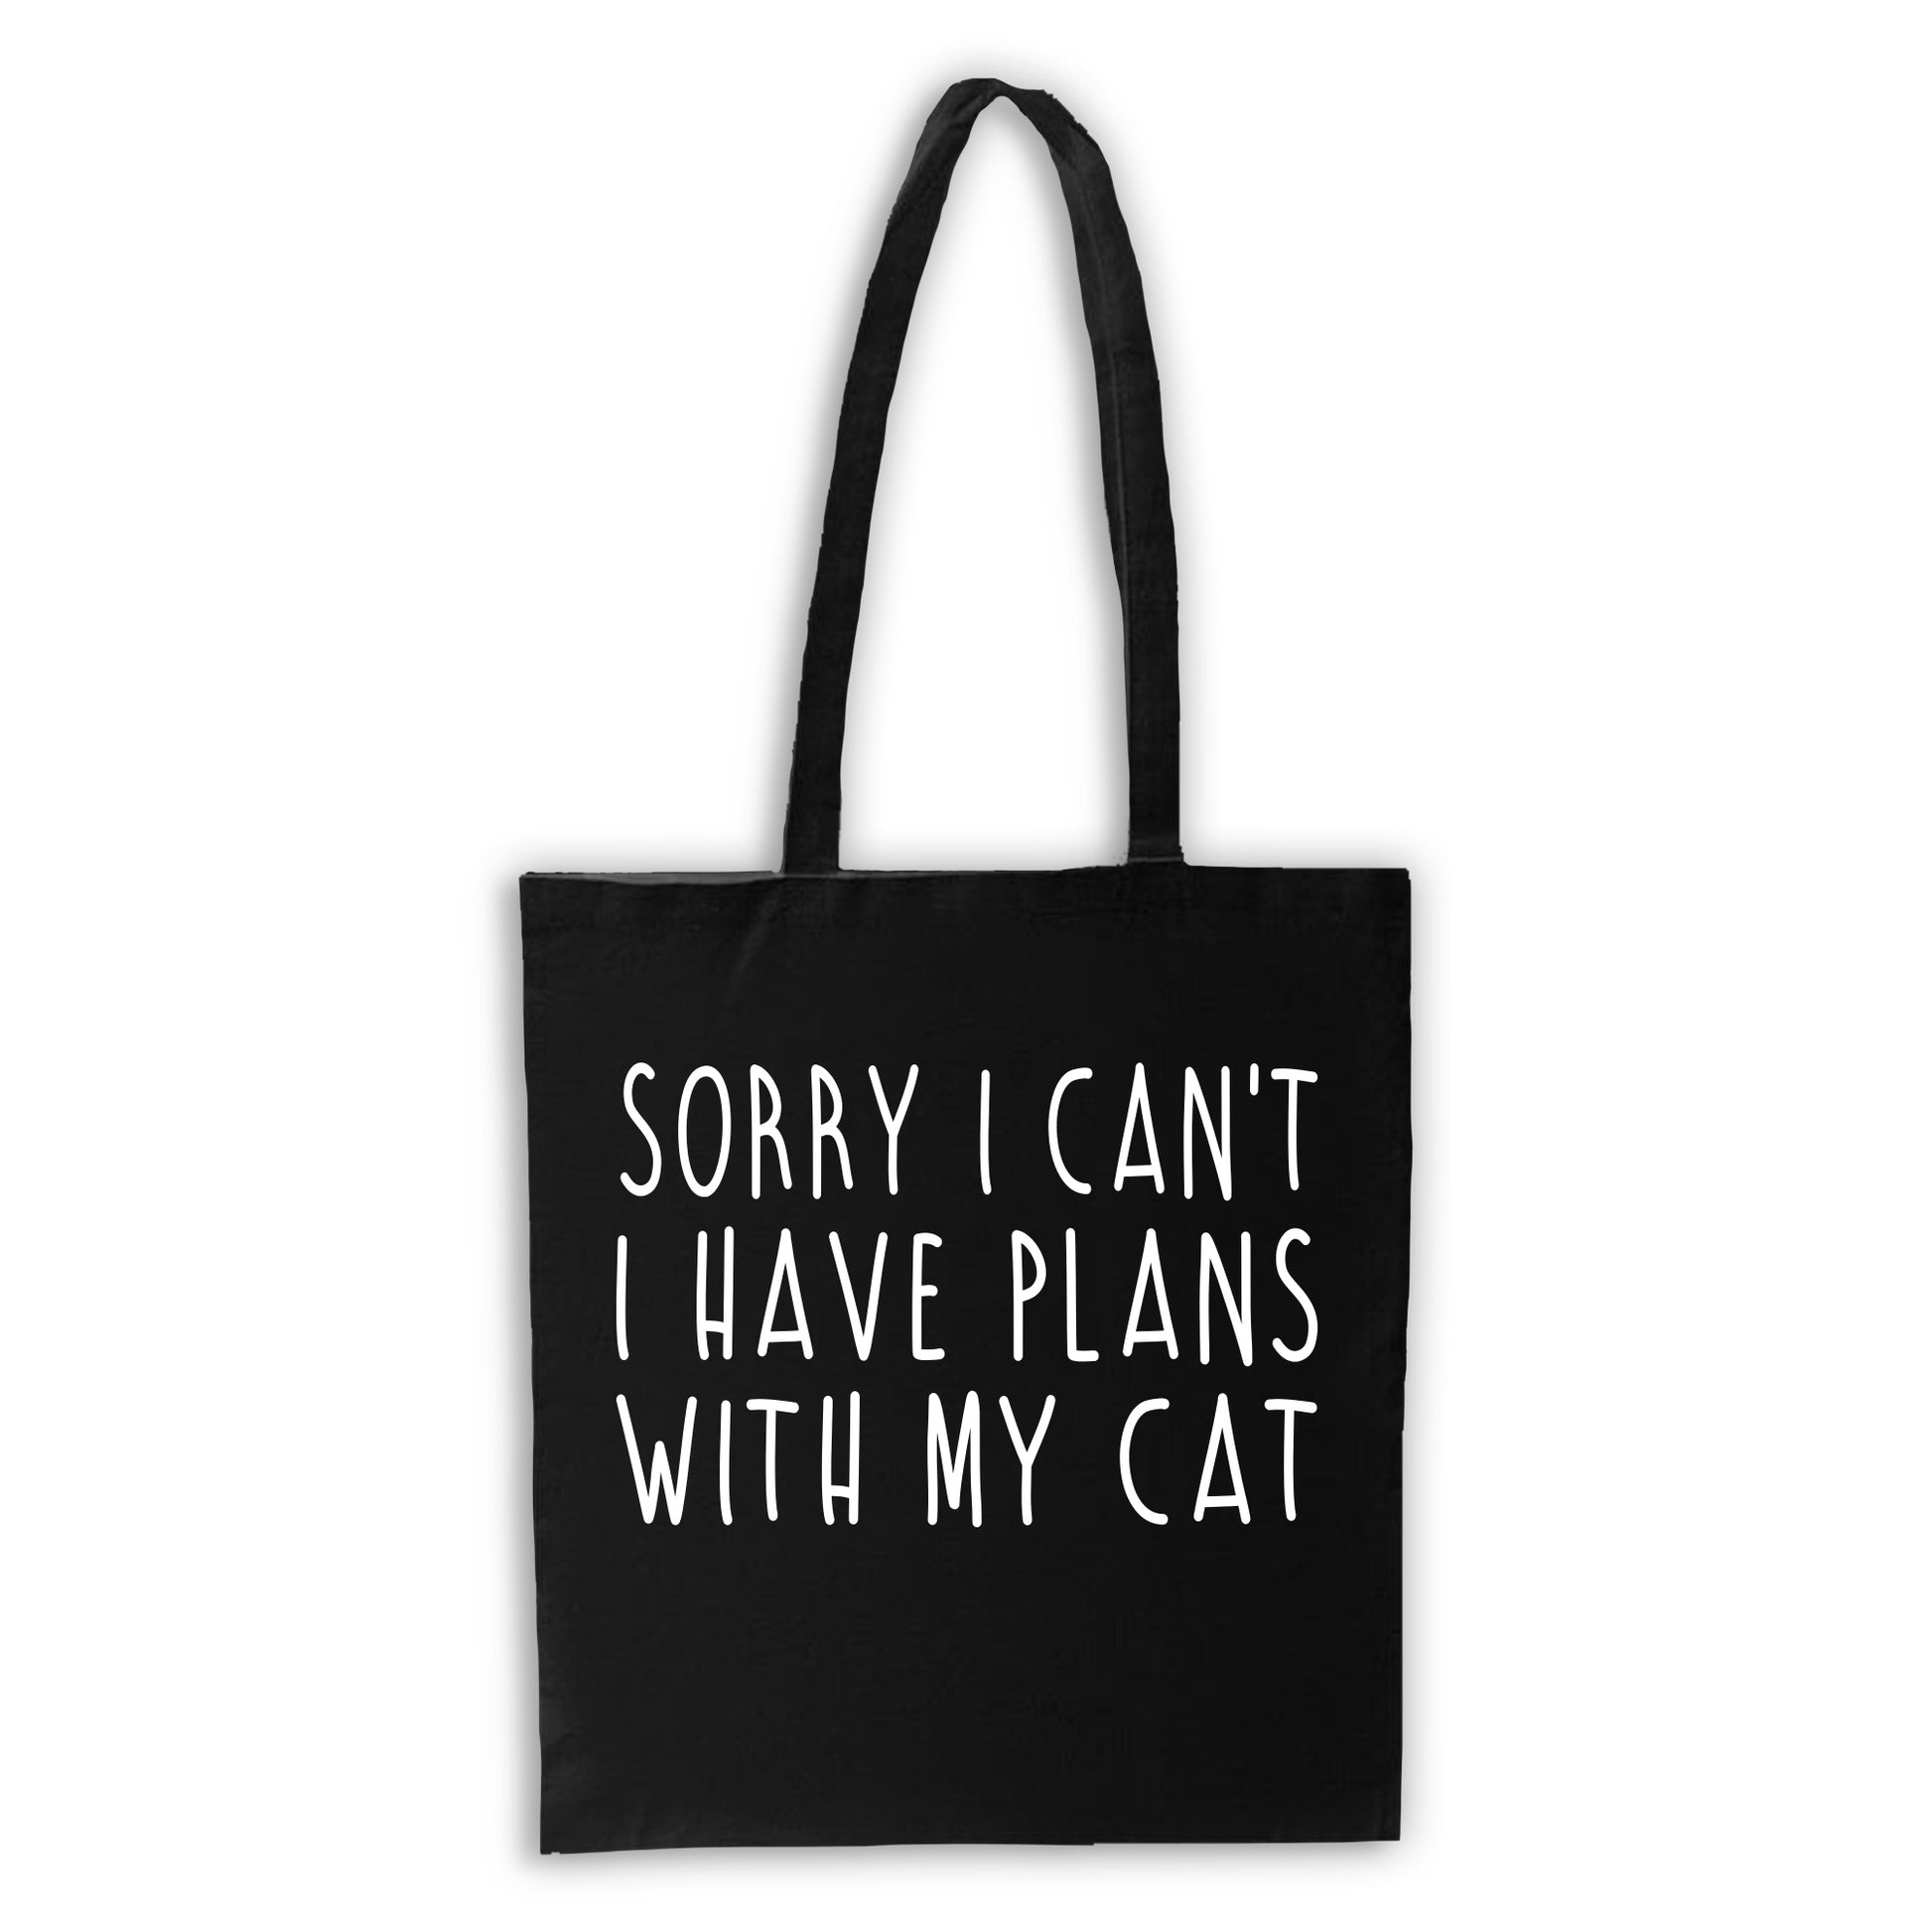 Sorry I Can't, I Have Plans With My Cat - Black Tote Bag